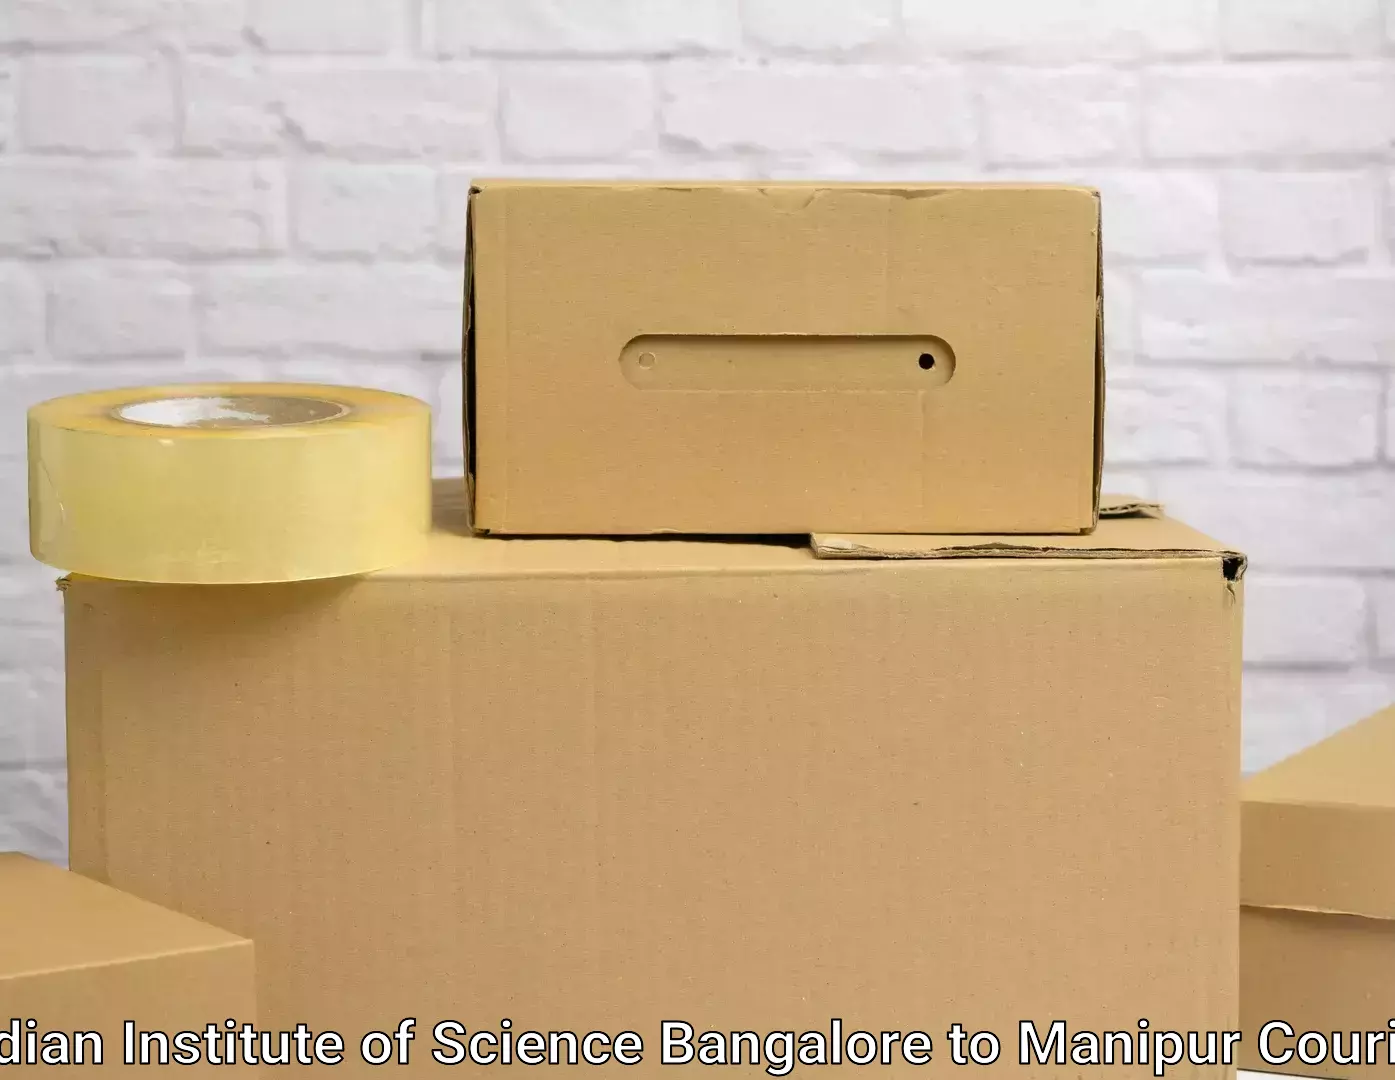 Nationwide furniture transport Indian Institute of Science Bangalore to Manipur